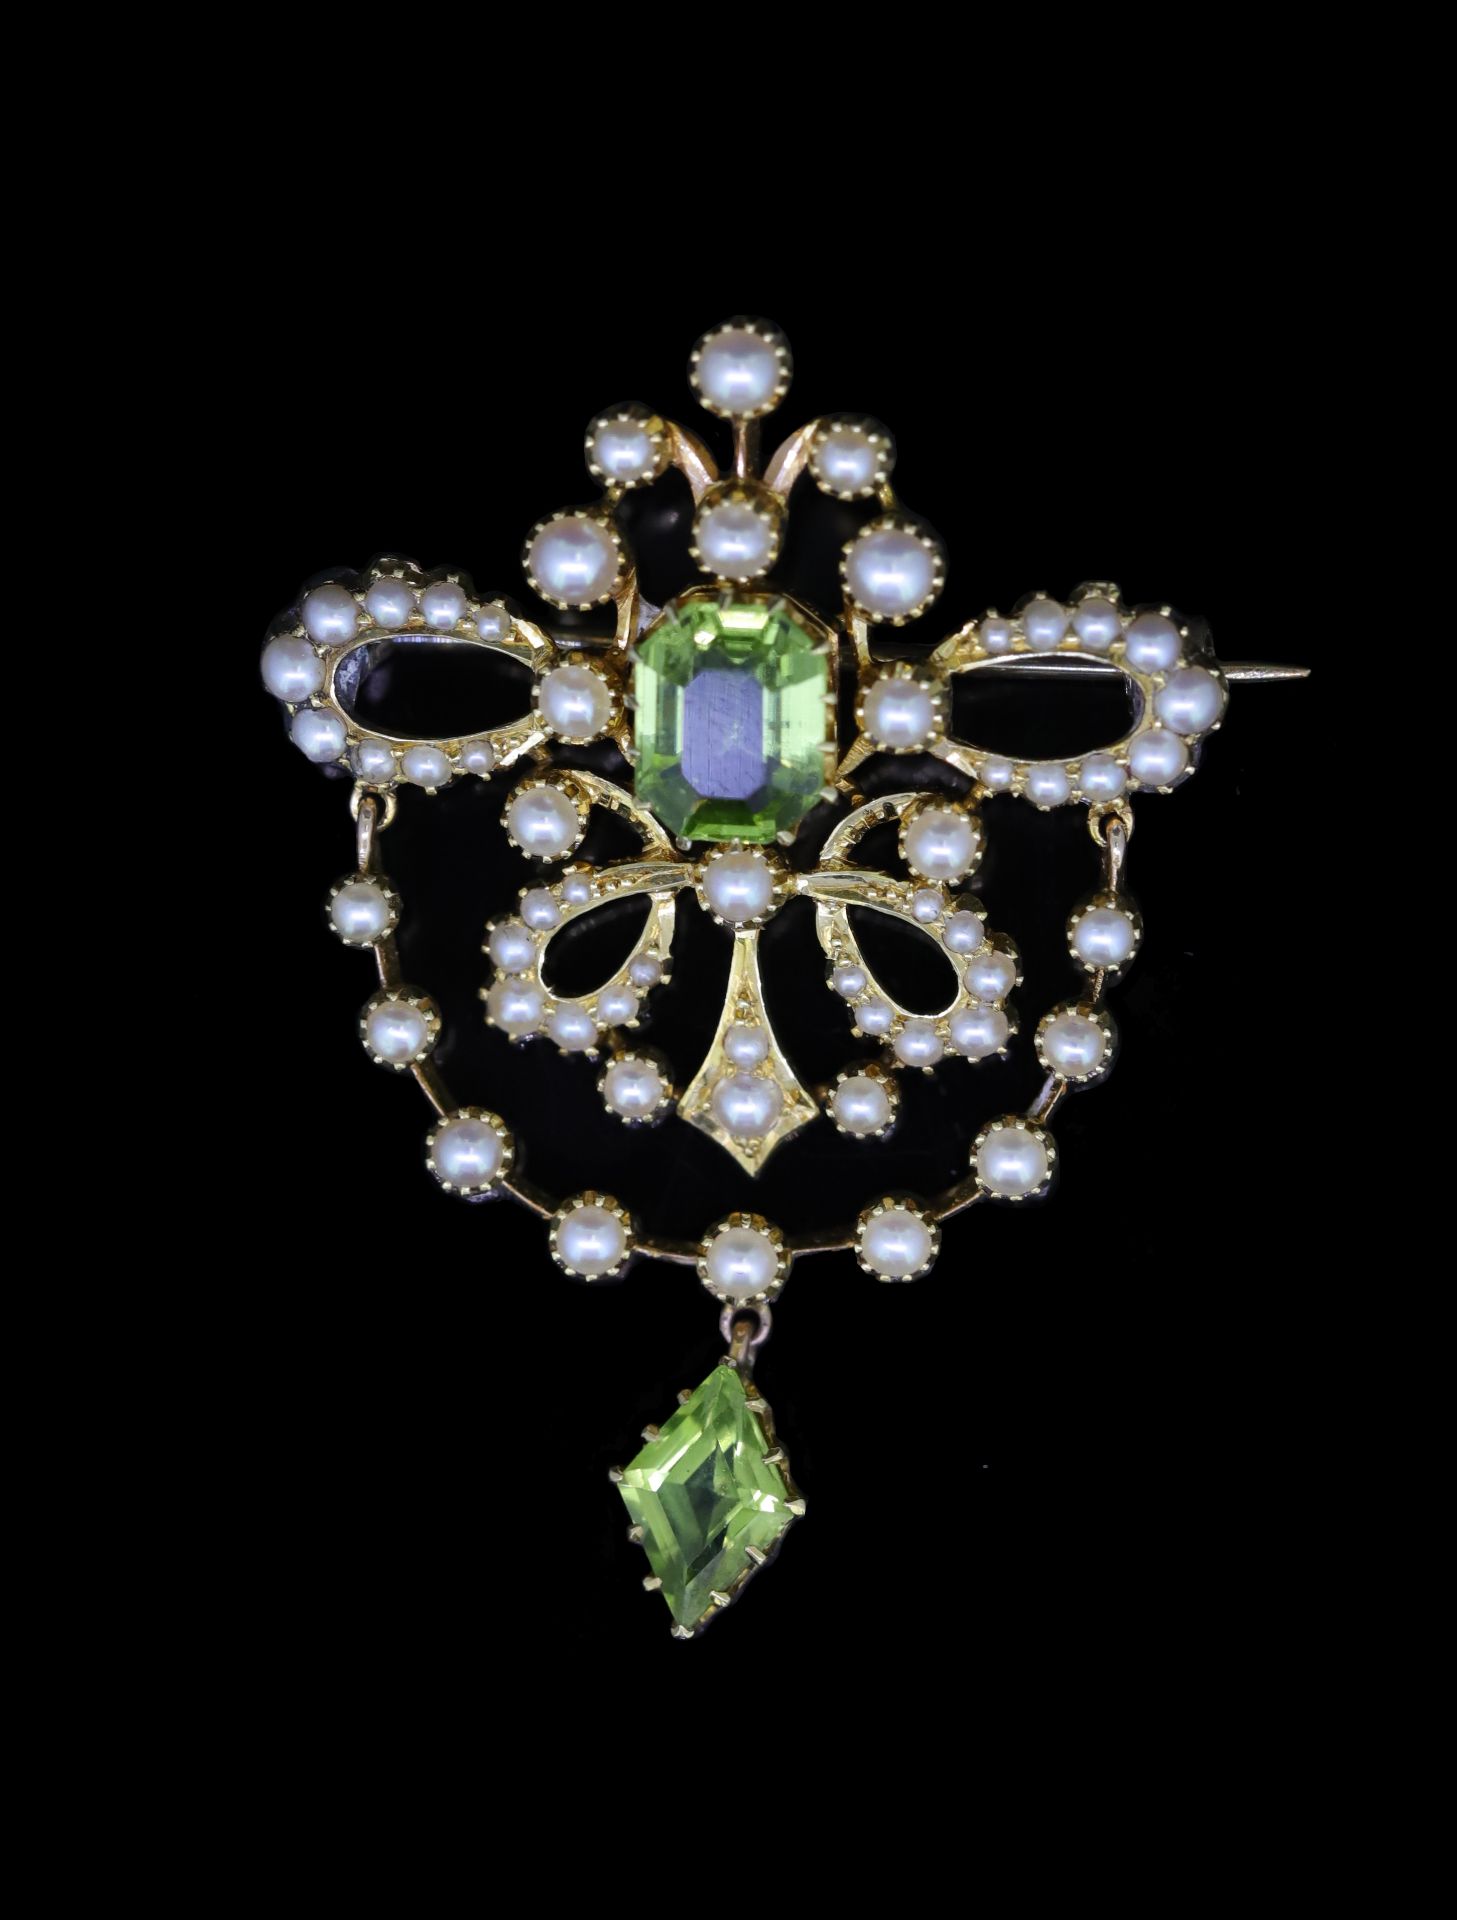 ANTIQUE PERIDOT AND PEARL BROOCH